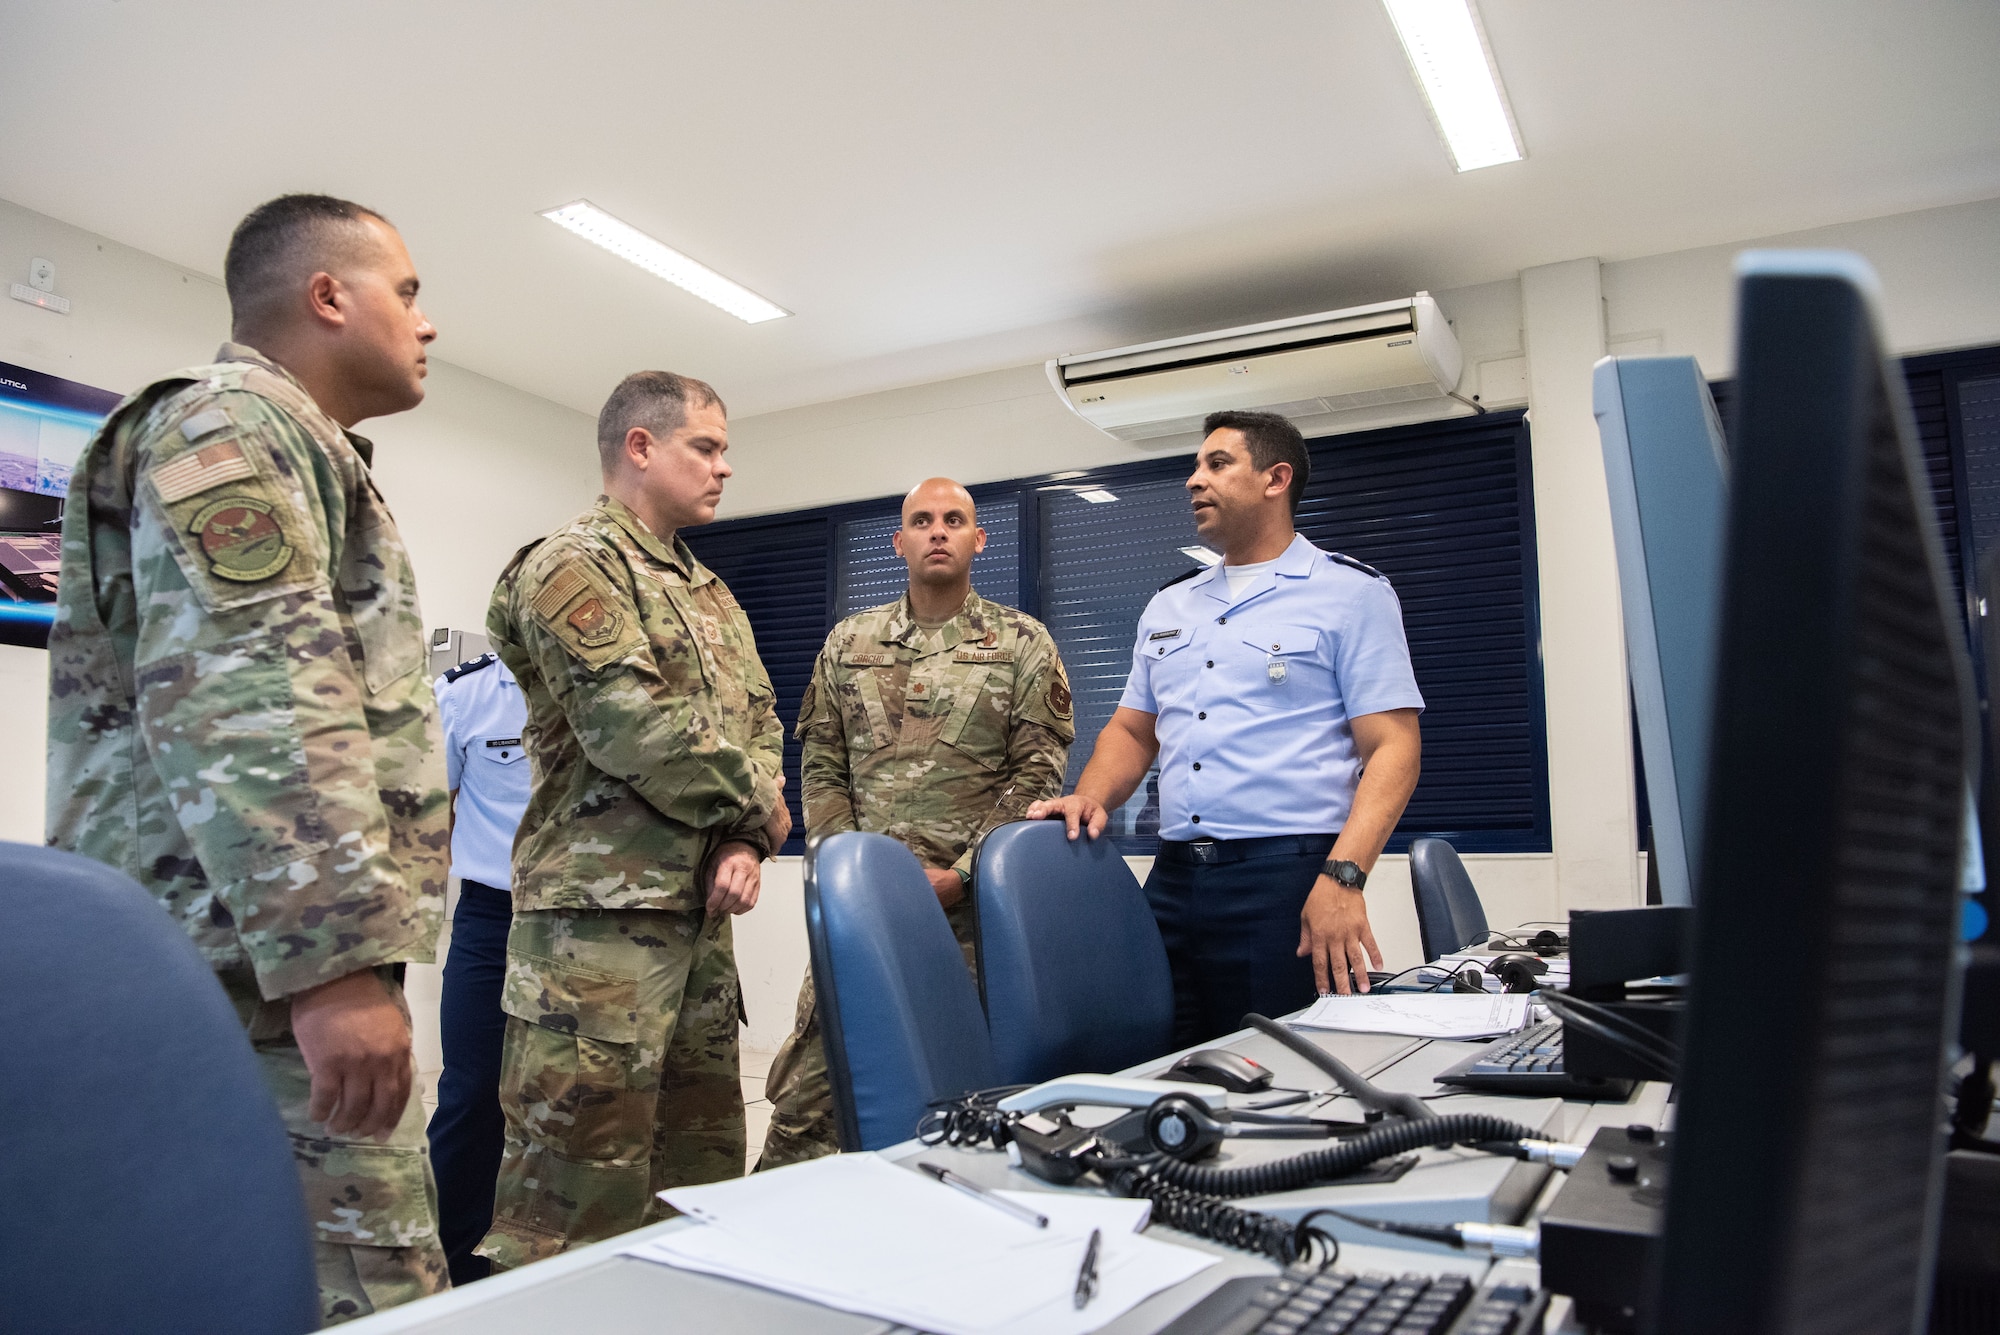 Senior Master Sgt. Victor Alvarez, Senior Enlisted Leader of the 837th Training Squadron, Chief Master Sgt. Yusef Saad, IAAFA’s Senior Enlisted Leader, and Maj. Elias Corcho, Director of Operations, of the 837 TRS stand during a tour of the Aeronautics Specialist School in Sao Paolo, Brazil, Aug. 22, 2023. IAAFA led the professional development subject matter expert exchange with the Brazilian Air Force. It was the first visit of its kind in over a decade. (U.S. Air Force photo by Vanessa R. Adame)